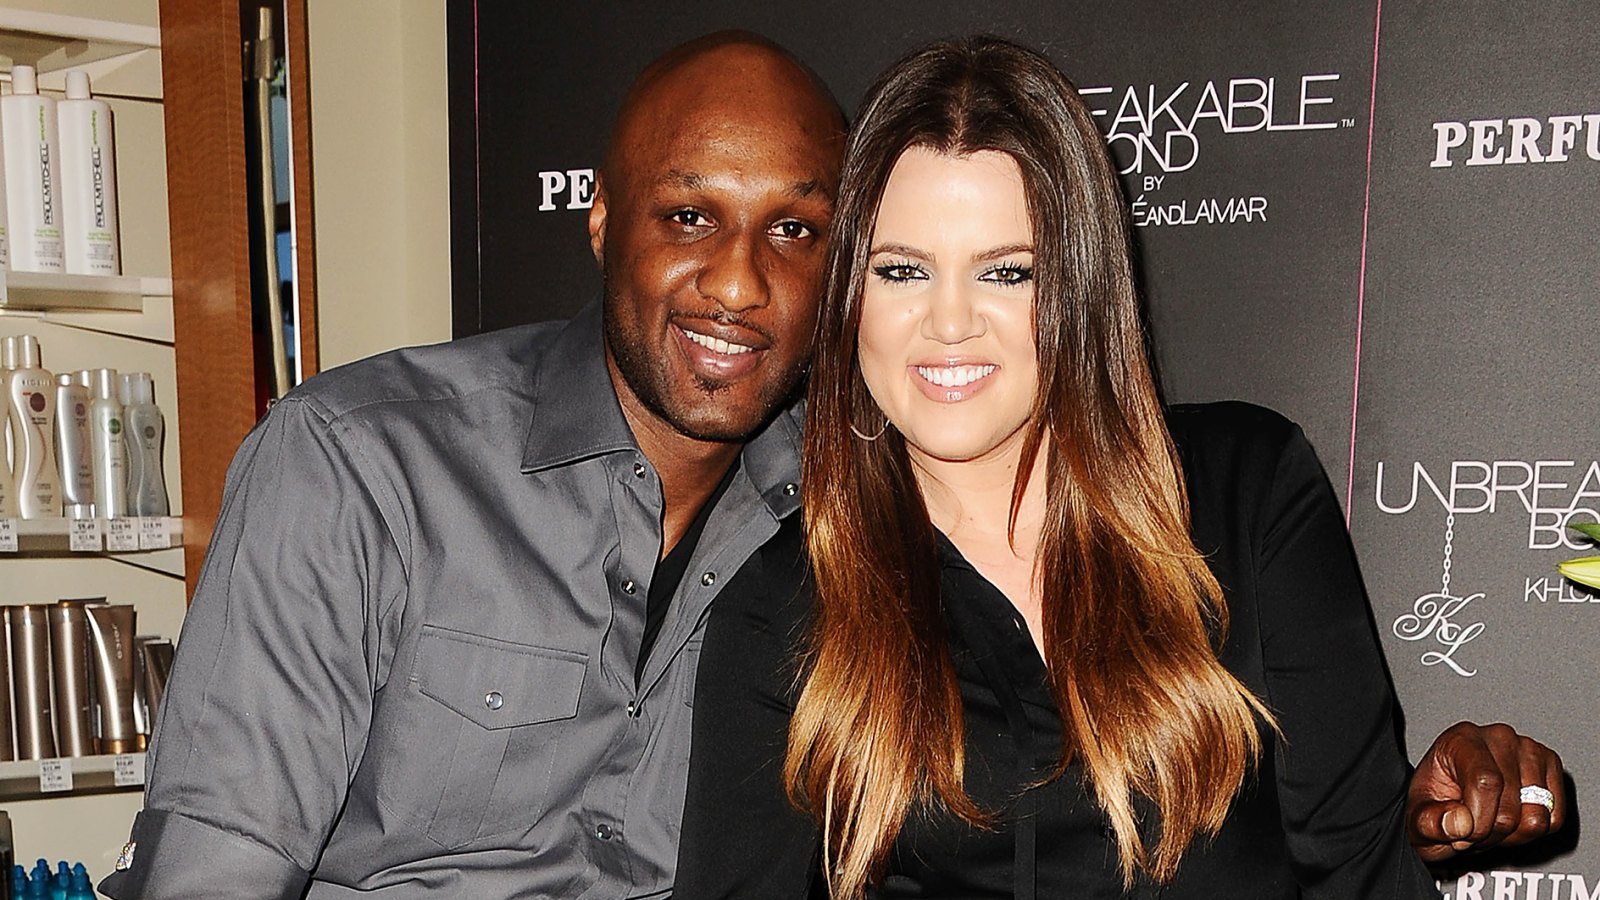 Commentary: Khloe Kardashian and Lamar Odom: A reality check darkens a  reality show romance - Los Angeles Times